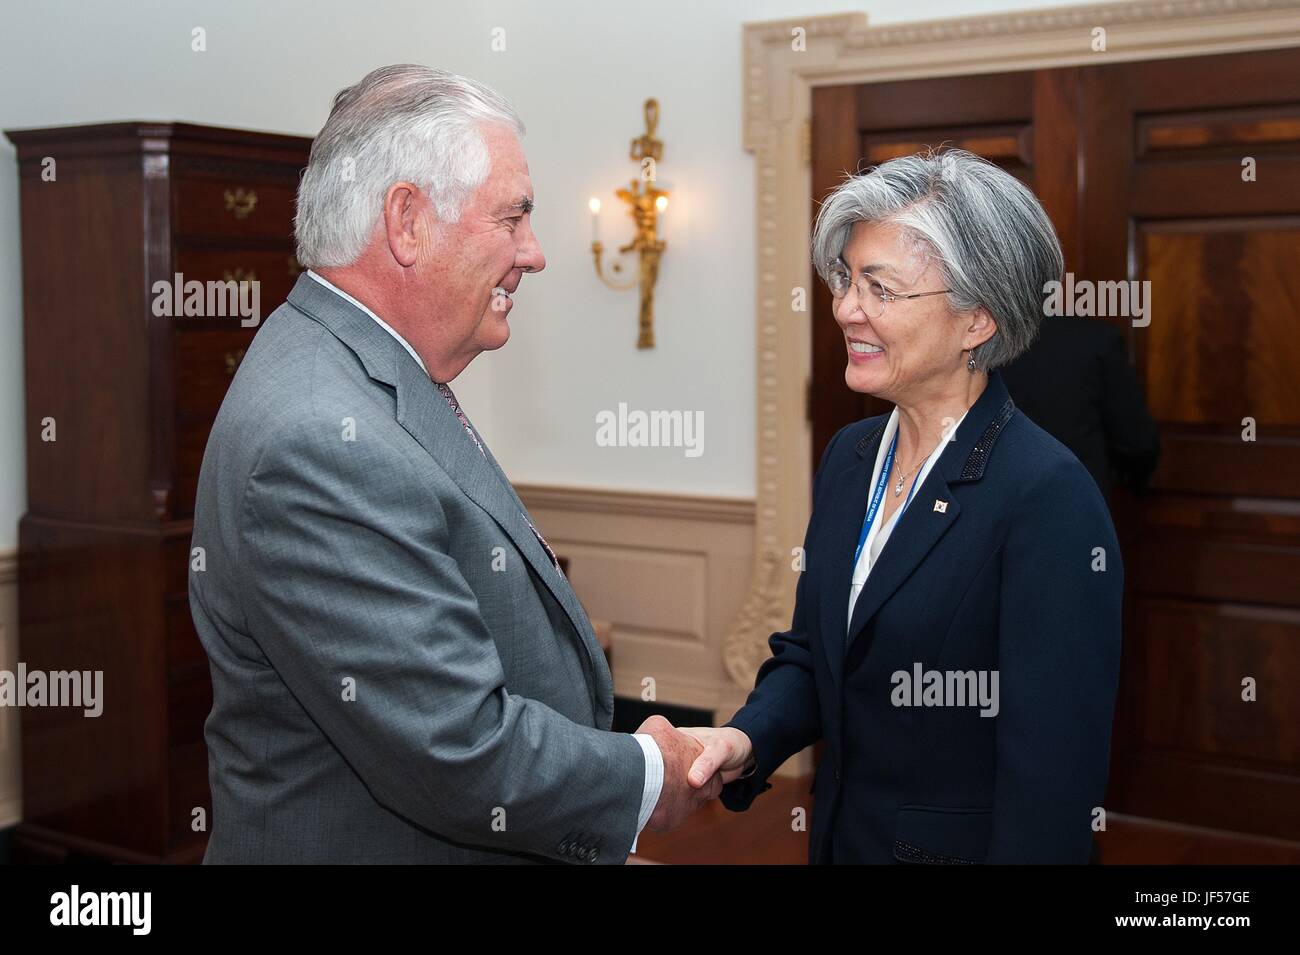 U.S. Secretary of State Rex Tillerson welcomes Korean Foreign Minister Kang Kyung-wha before the start of a bilateral meeting June 28, 2017 in Washington D.C. Stock Photo